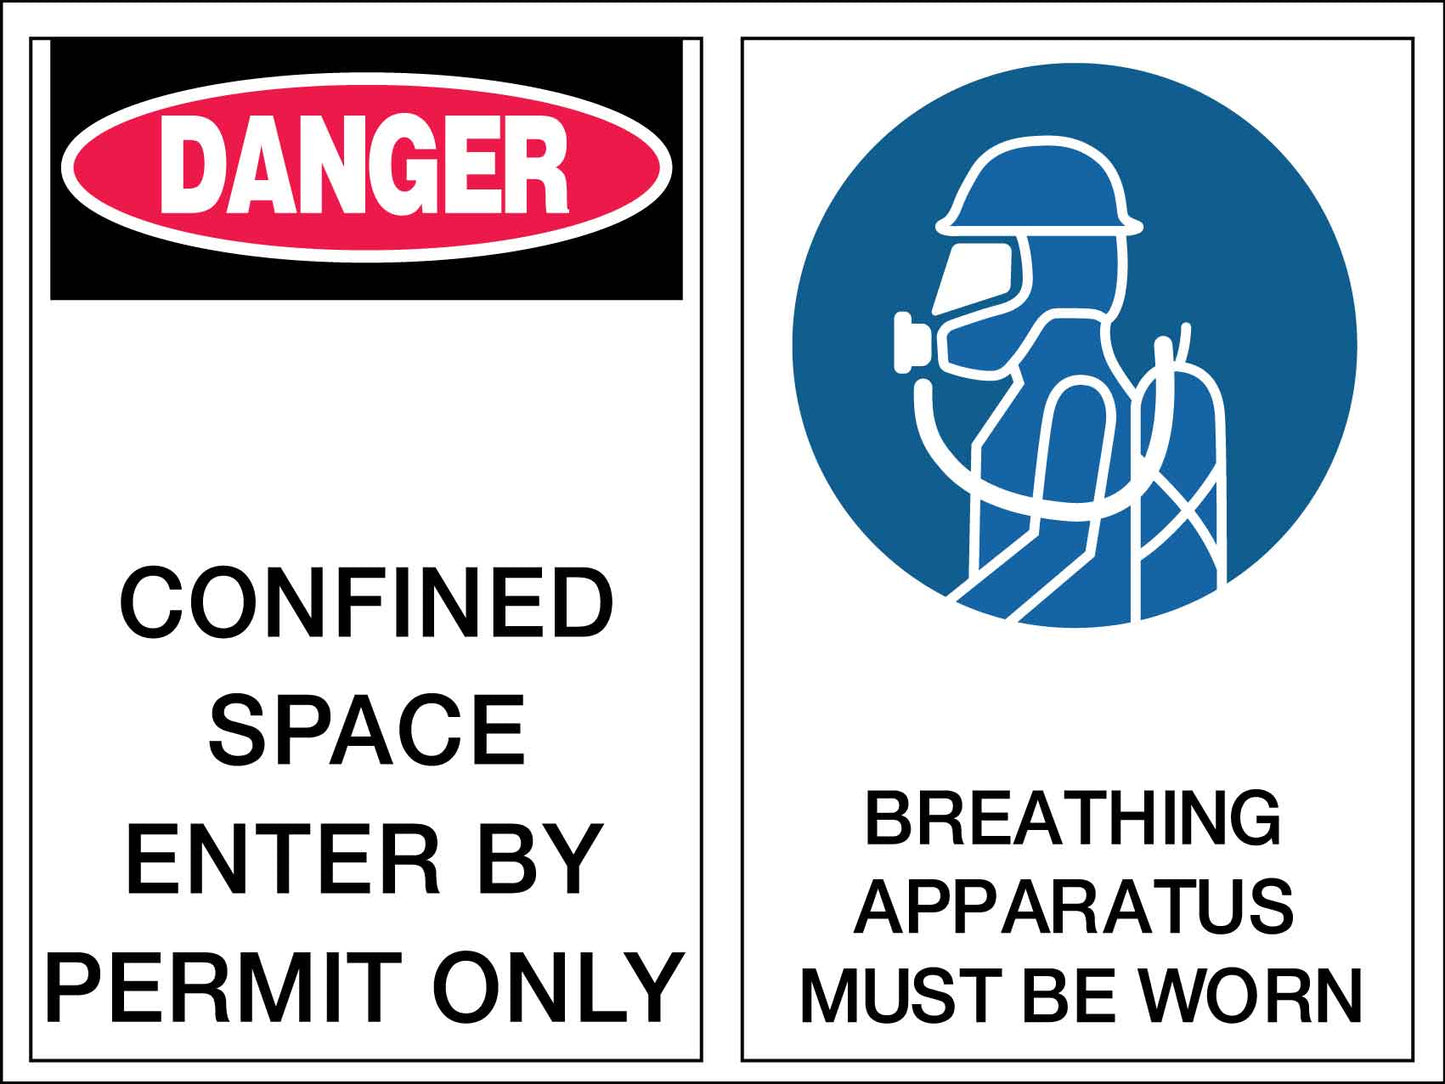 Danger Confined Space Enter by Permit Only Breathing Apparatus Sign